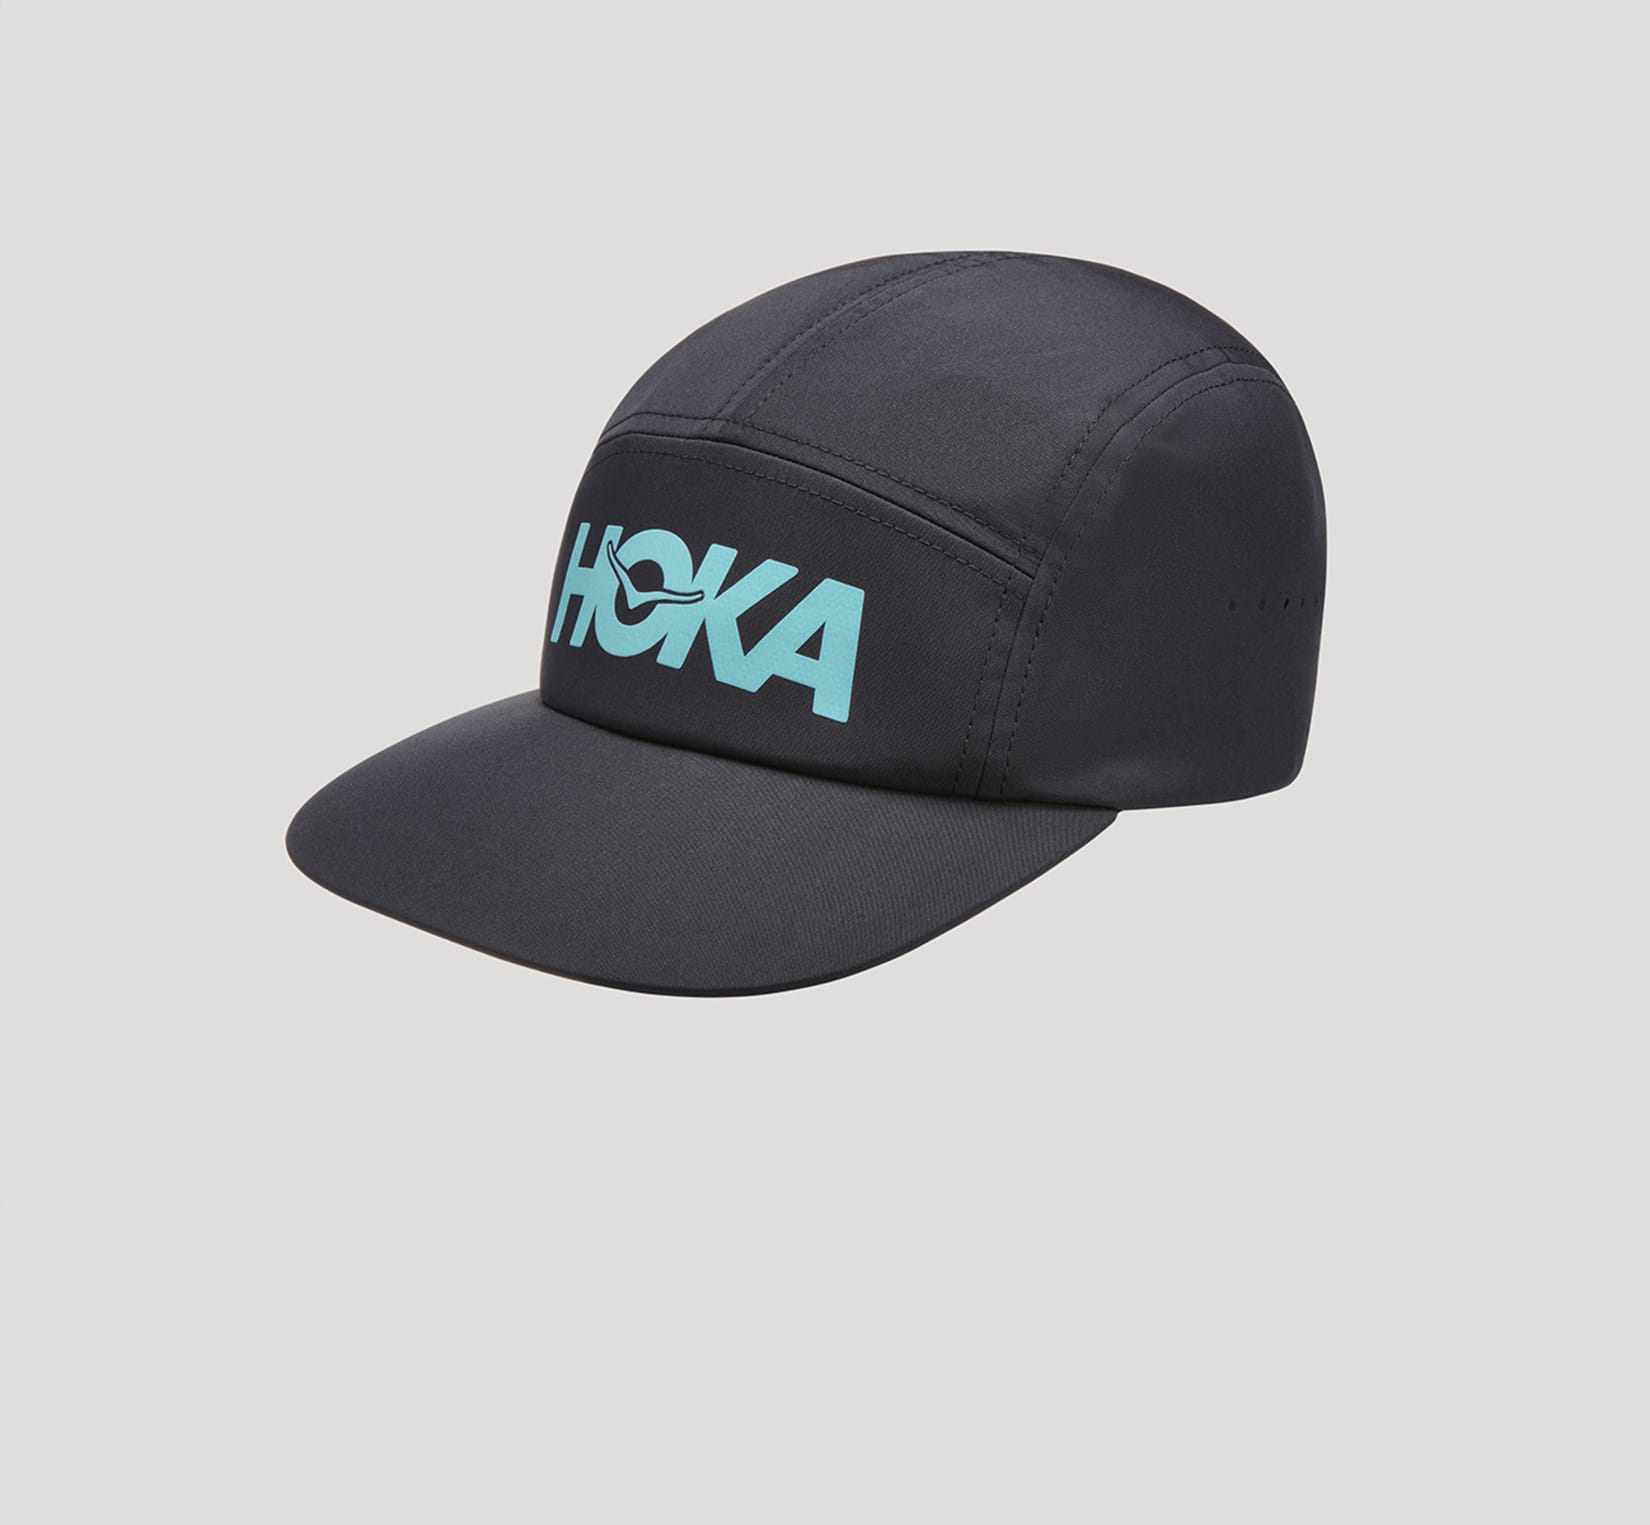 Hoka One One Time to Fly Color Block Hat Cap StrapBack Adjustable NWOT